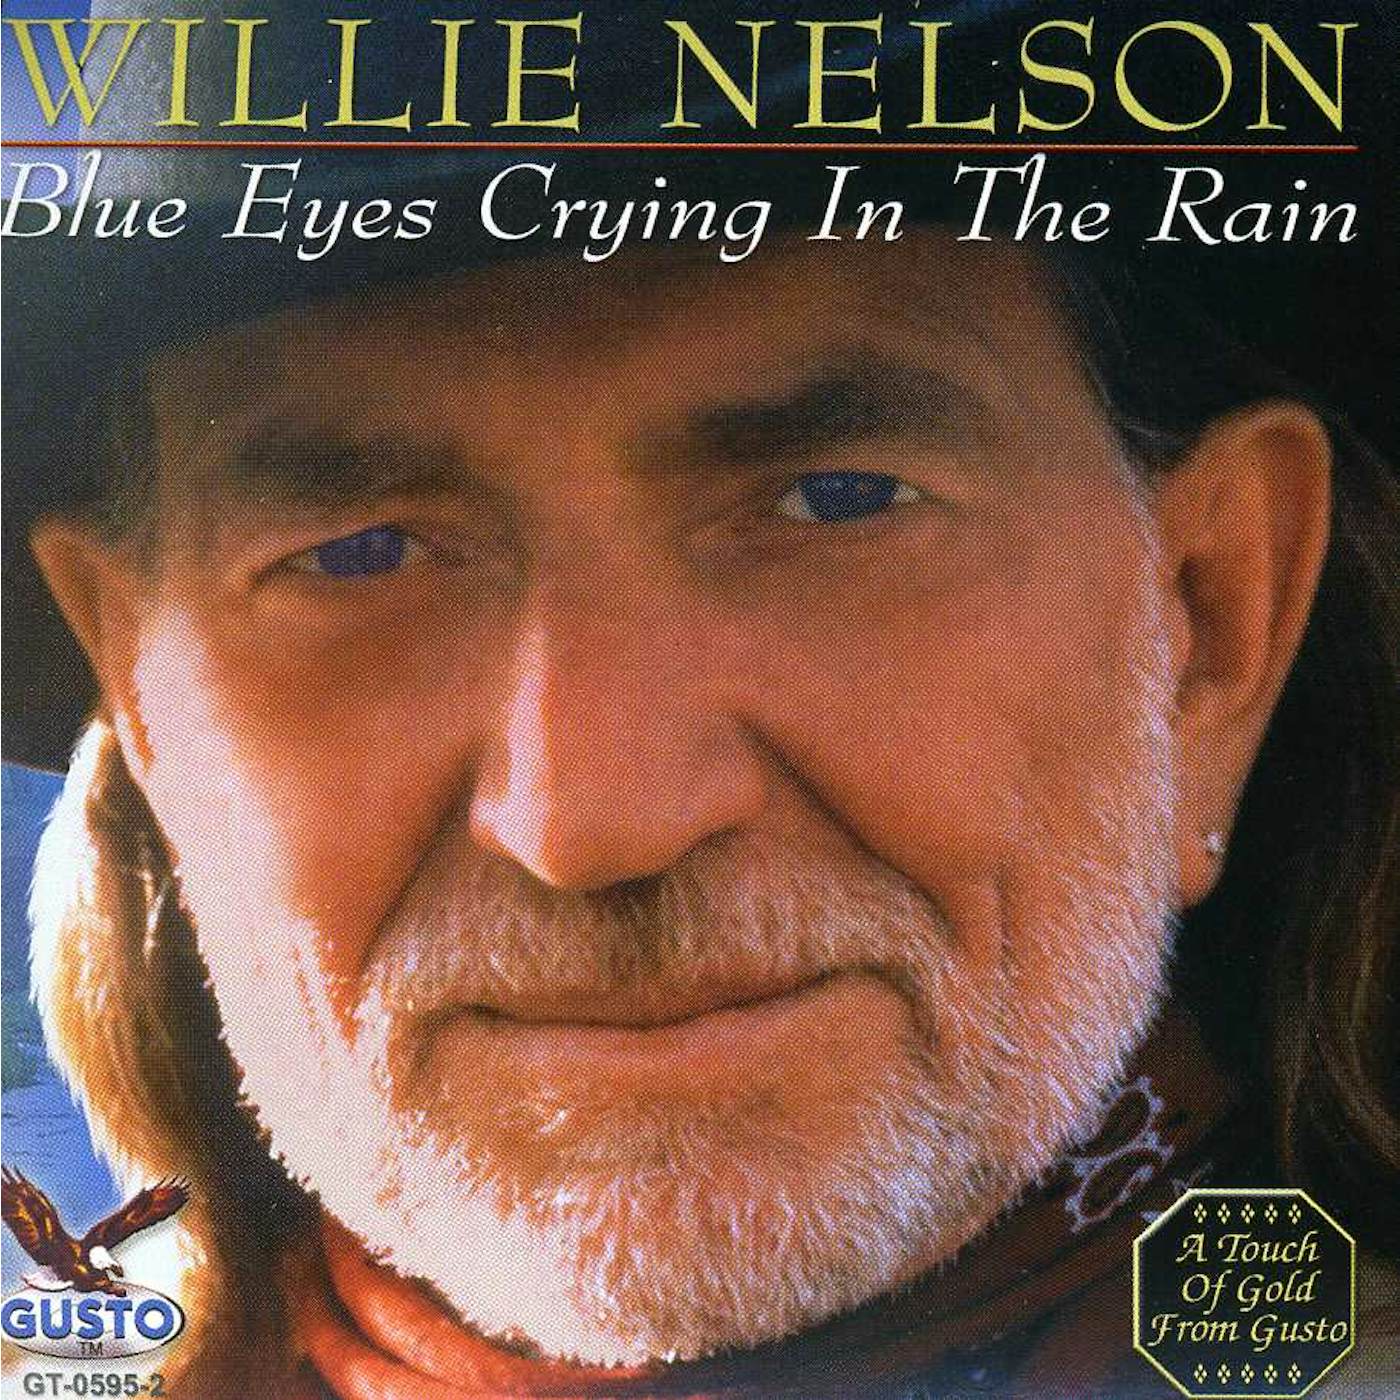 Willie Nelson BLUE EYES CRYING IN THE RAIN CD